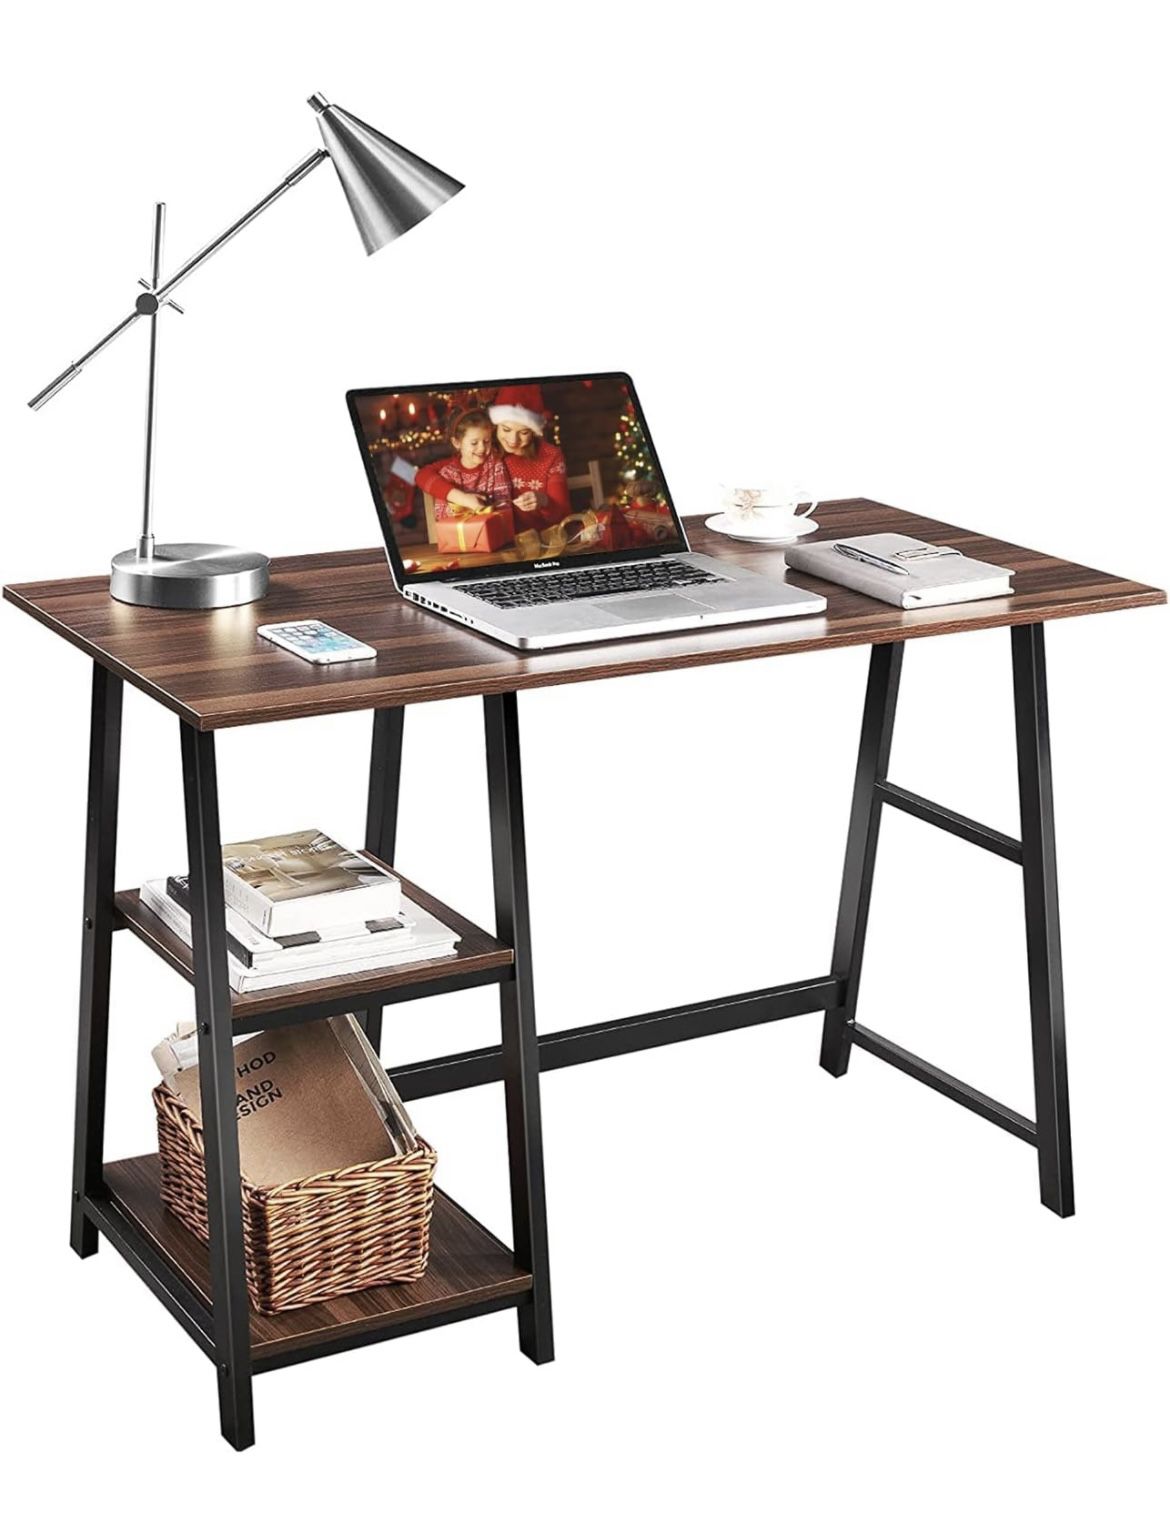 43” Computer Desk/Writing Desk with 2 Storage Shelves on Left or Right for Laptops